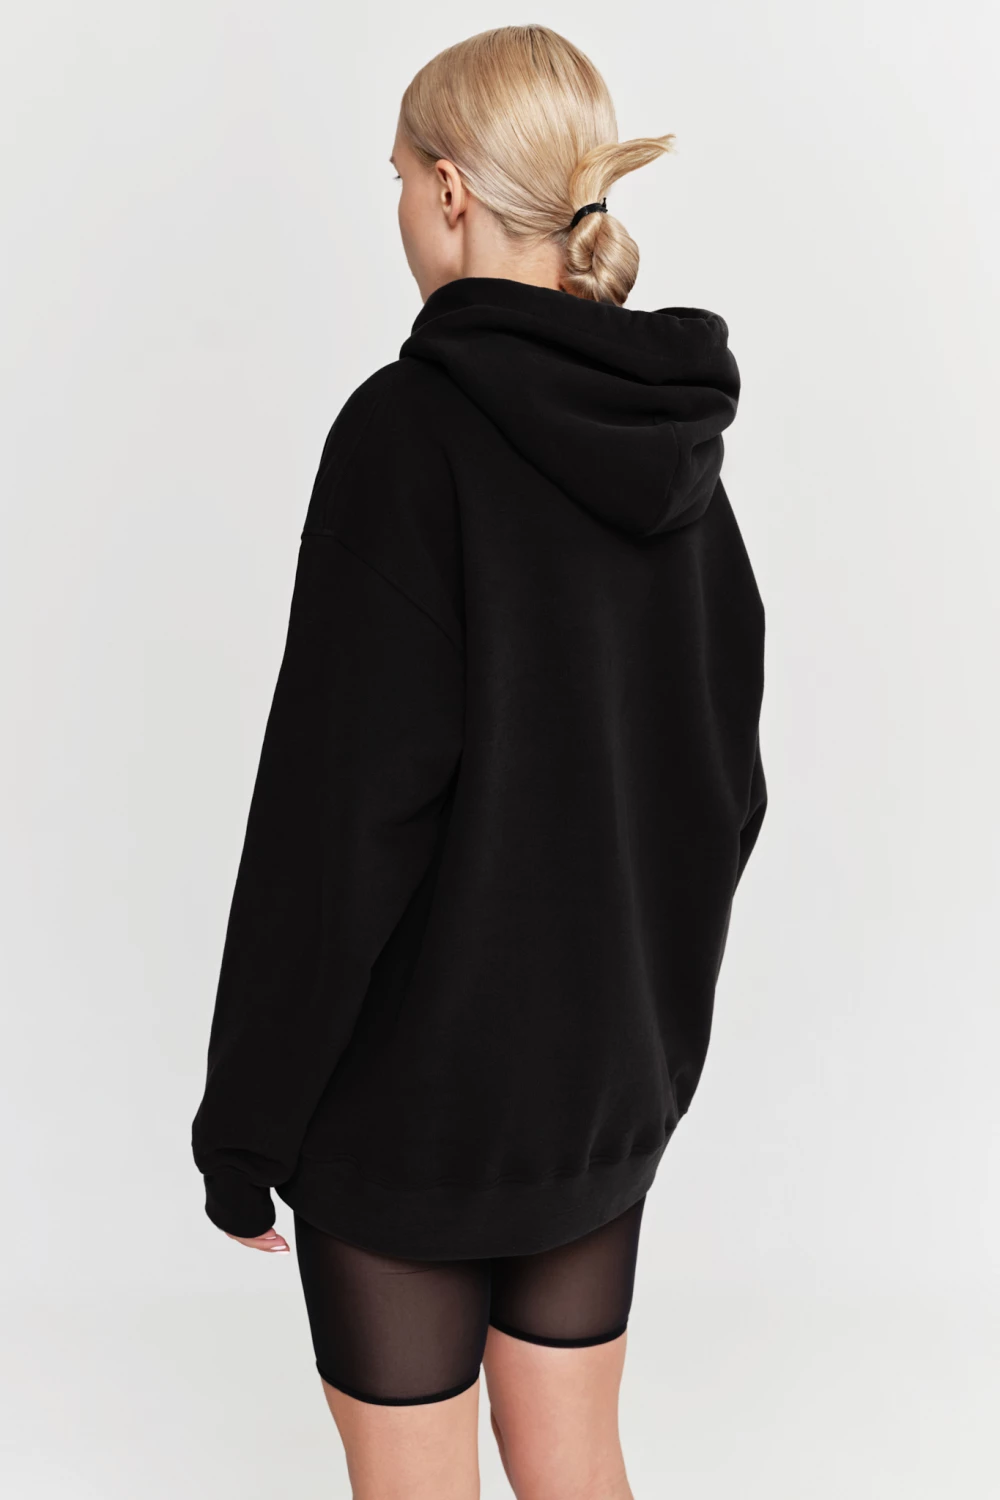 hoodie "shopping" in black color